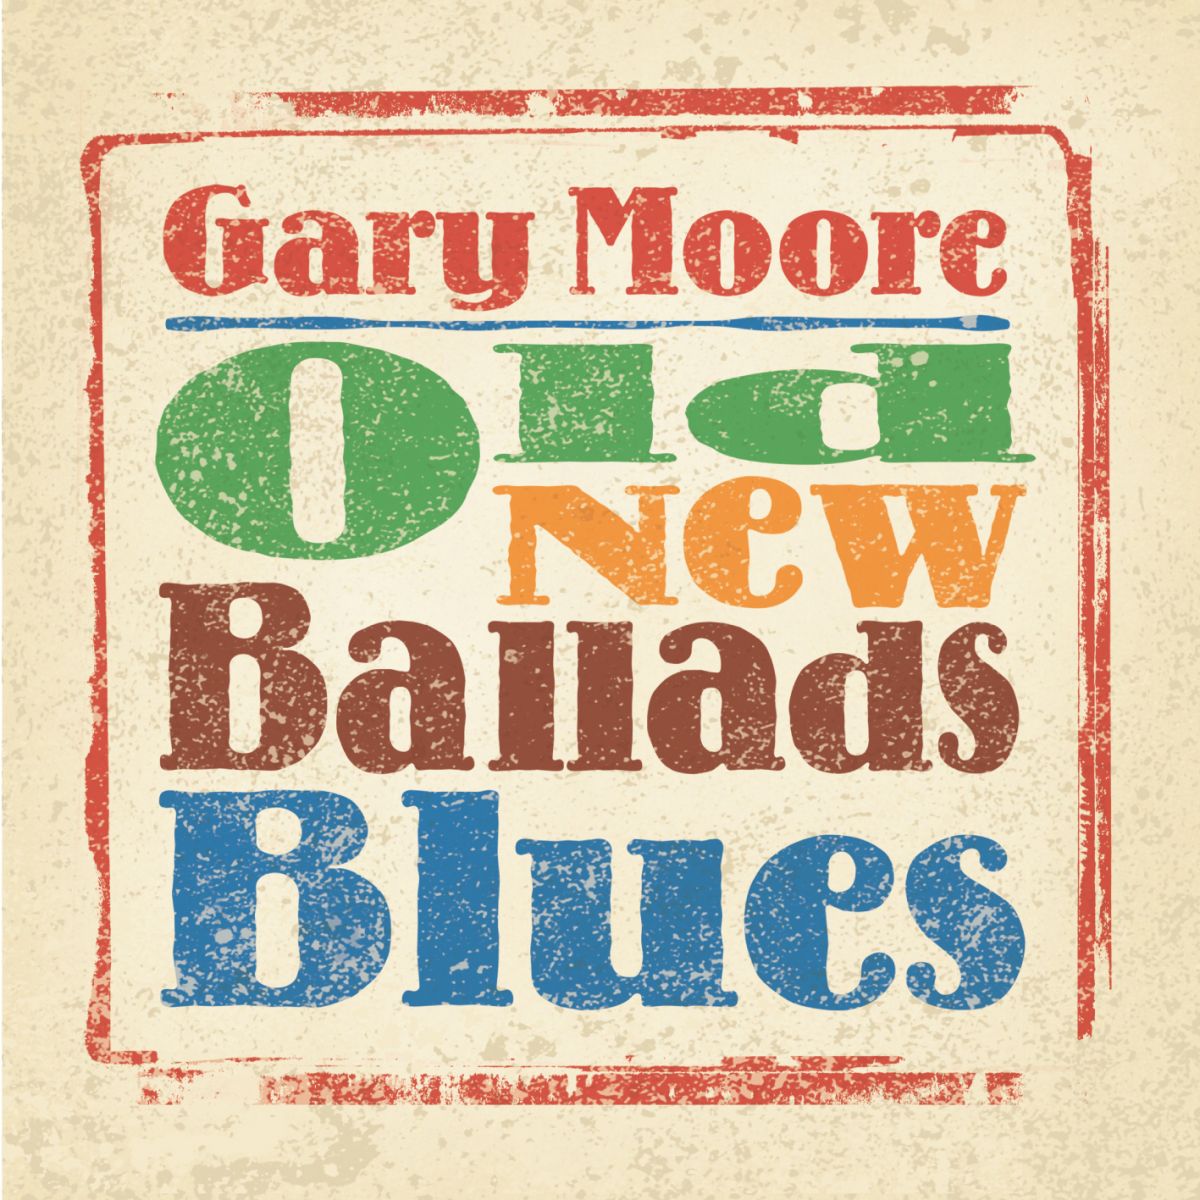 GARY MOORE - Old New Ballads Blues cover 